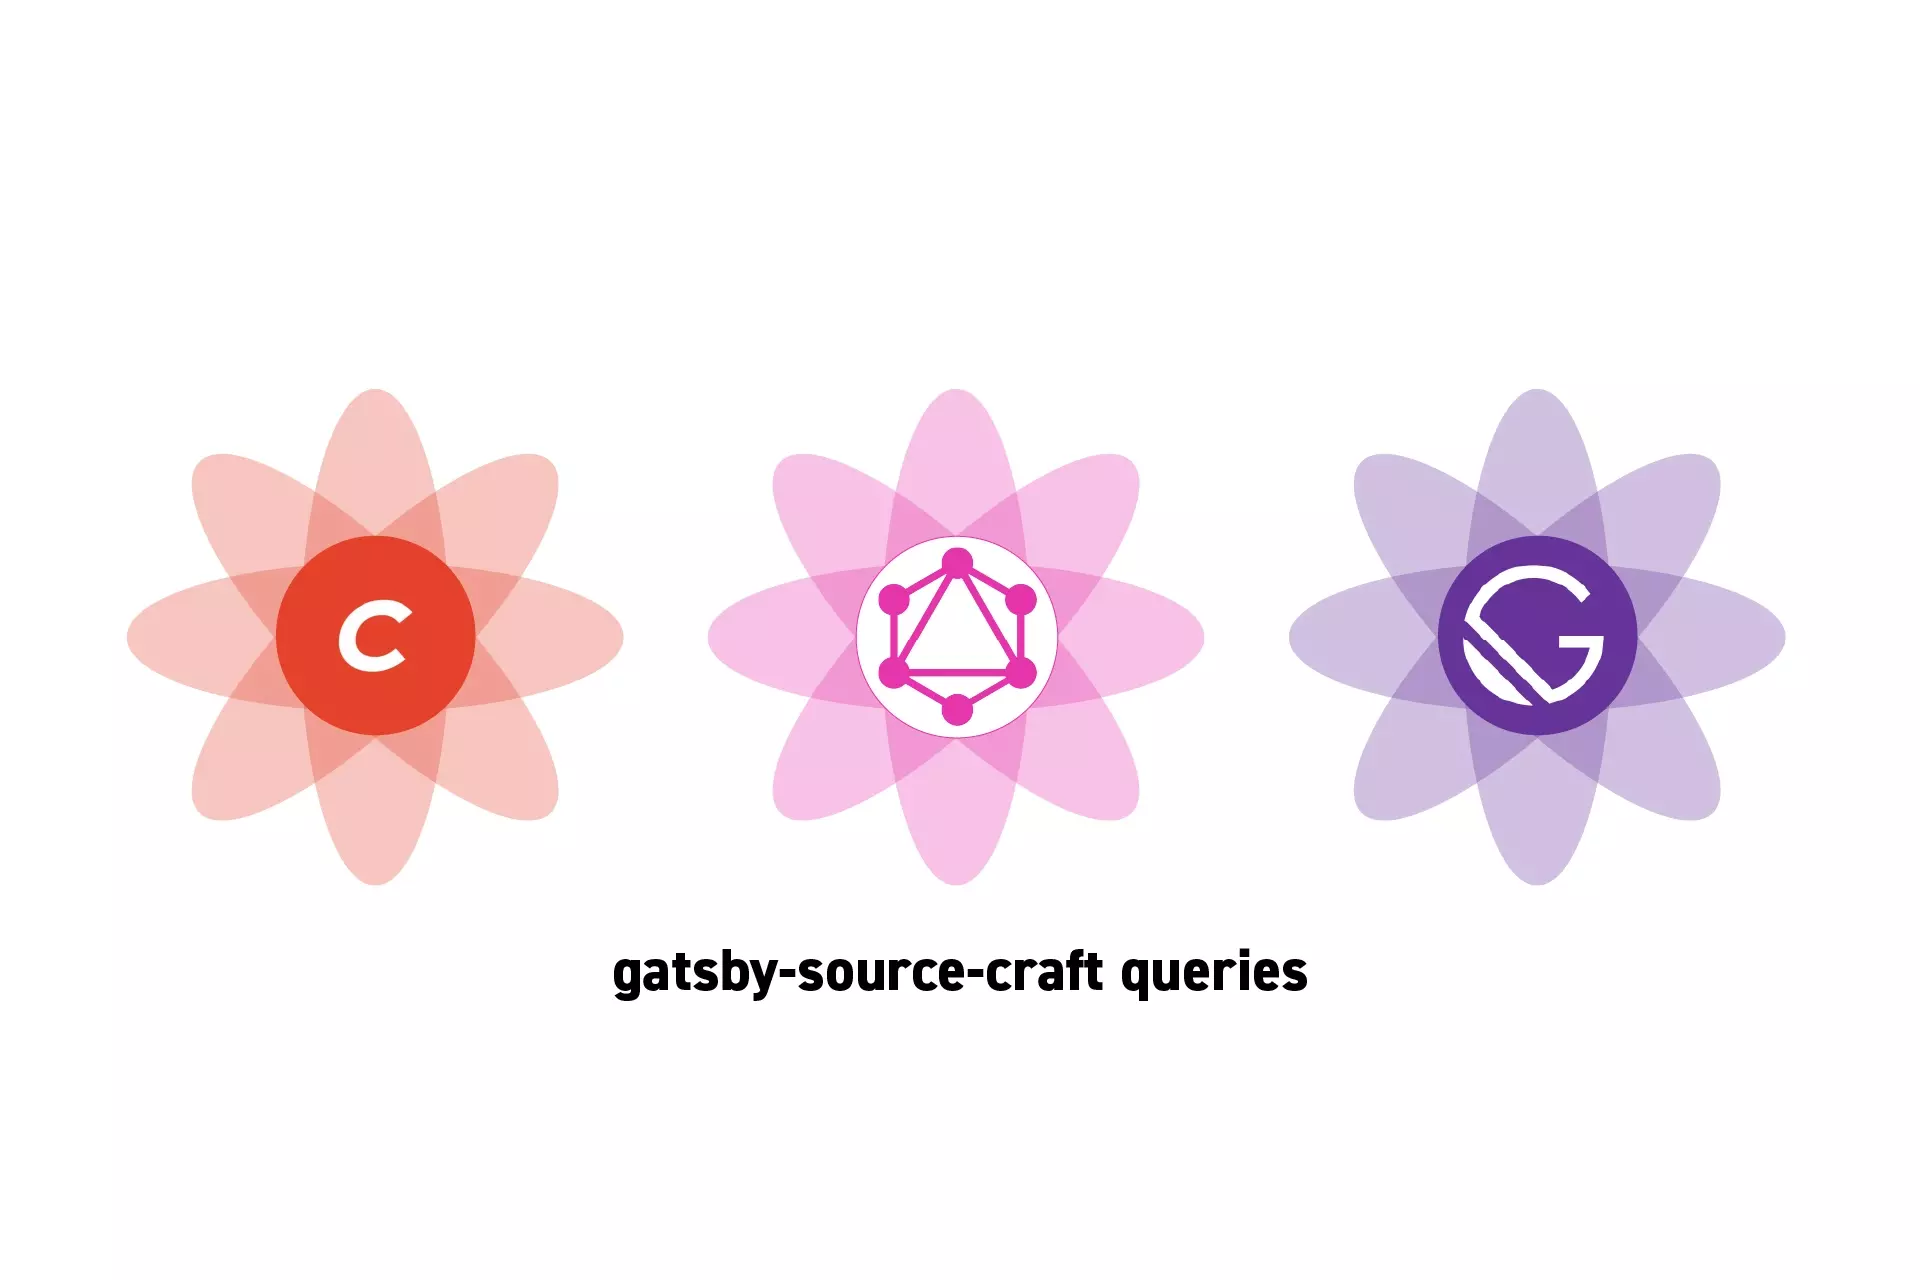 Three flowers that represent Craft CMS, GraphQL and GatsbyJS side by side. Beneath them sits the text “gatsby-source-craft queries”.